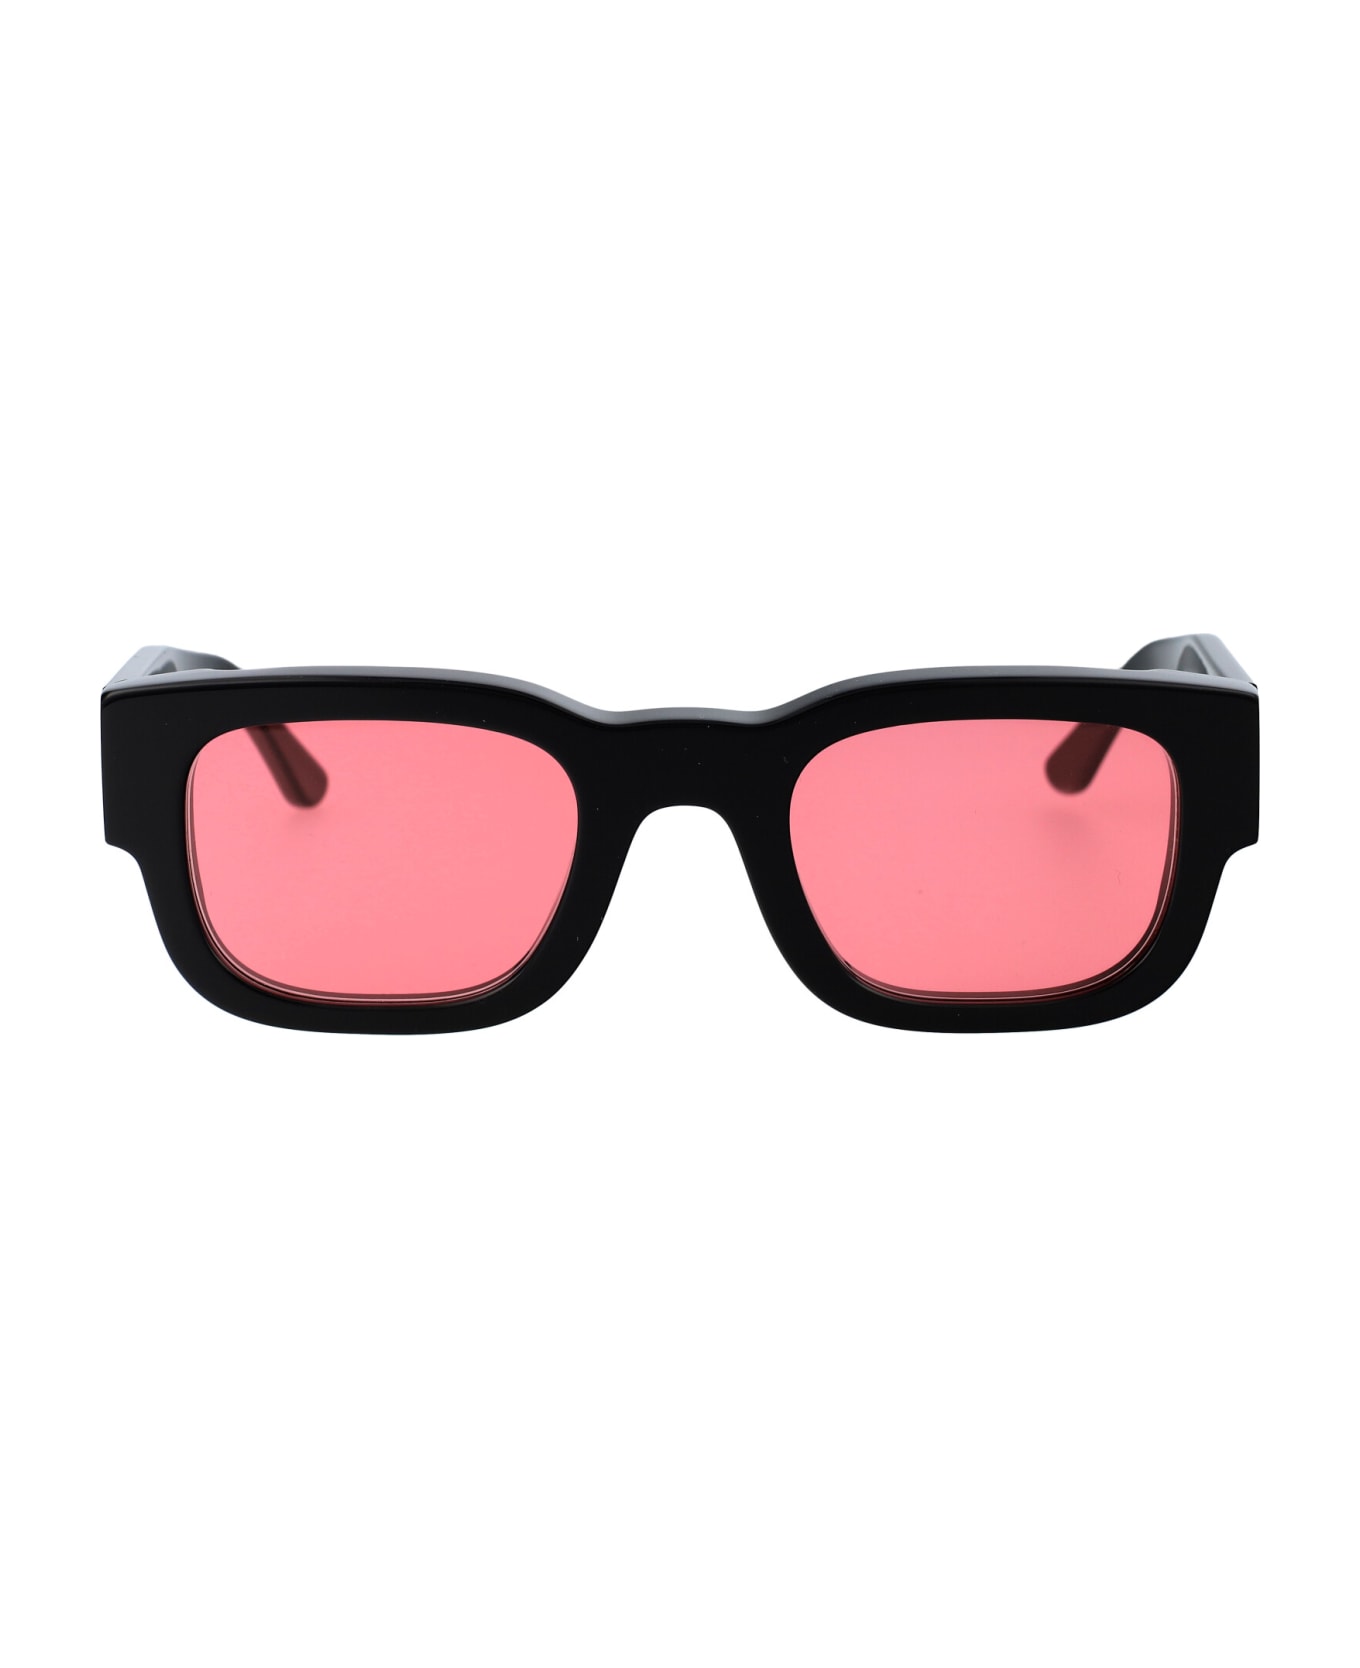 Thierry Lasry Foxxxy Sunglasses - 101 RED